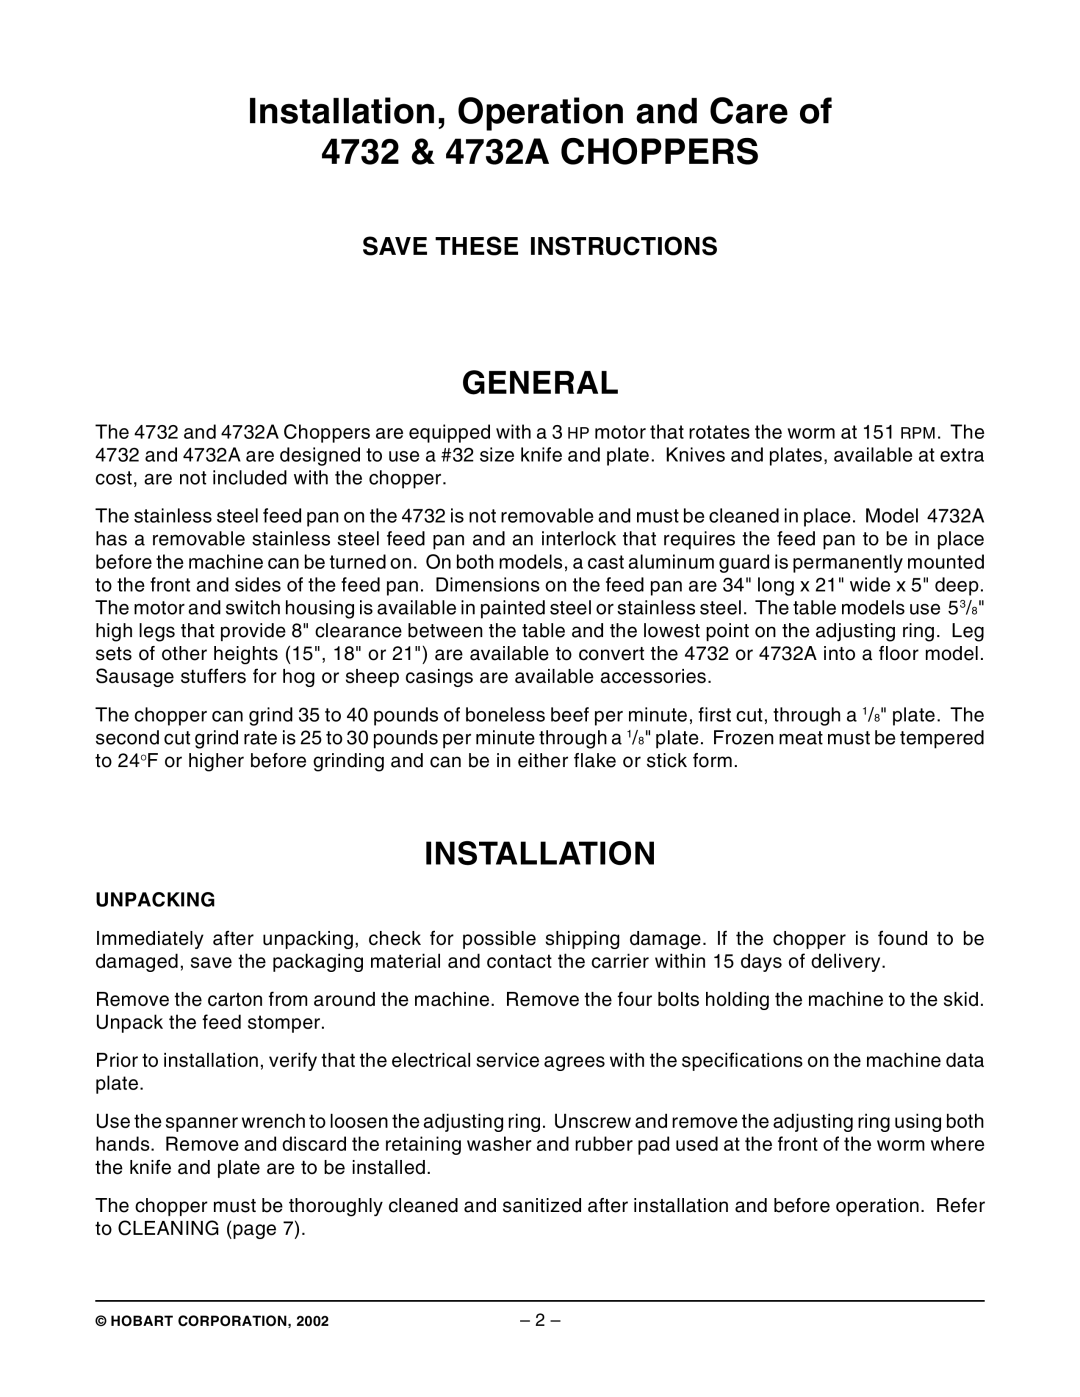 Hobart ML-19689 General, Installation, Operation and Care of 4732 & 4732A CHOPPERS, Save These Instructions, Unpacking 